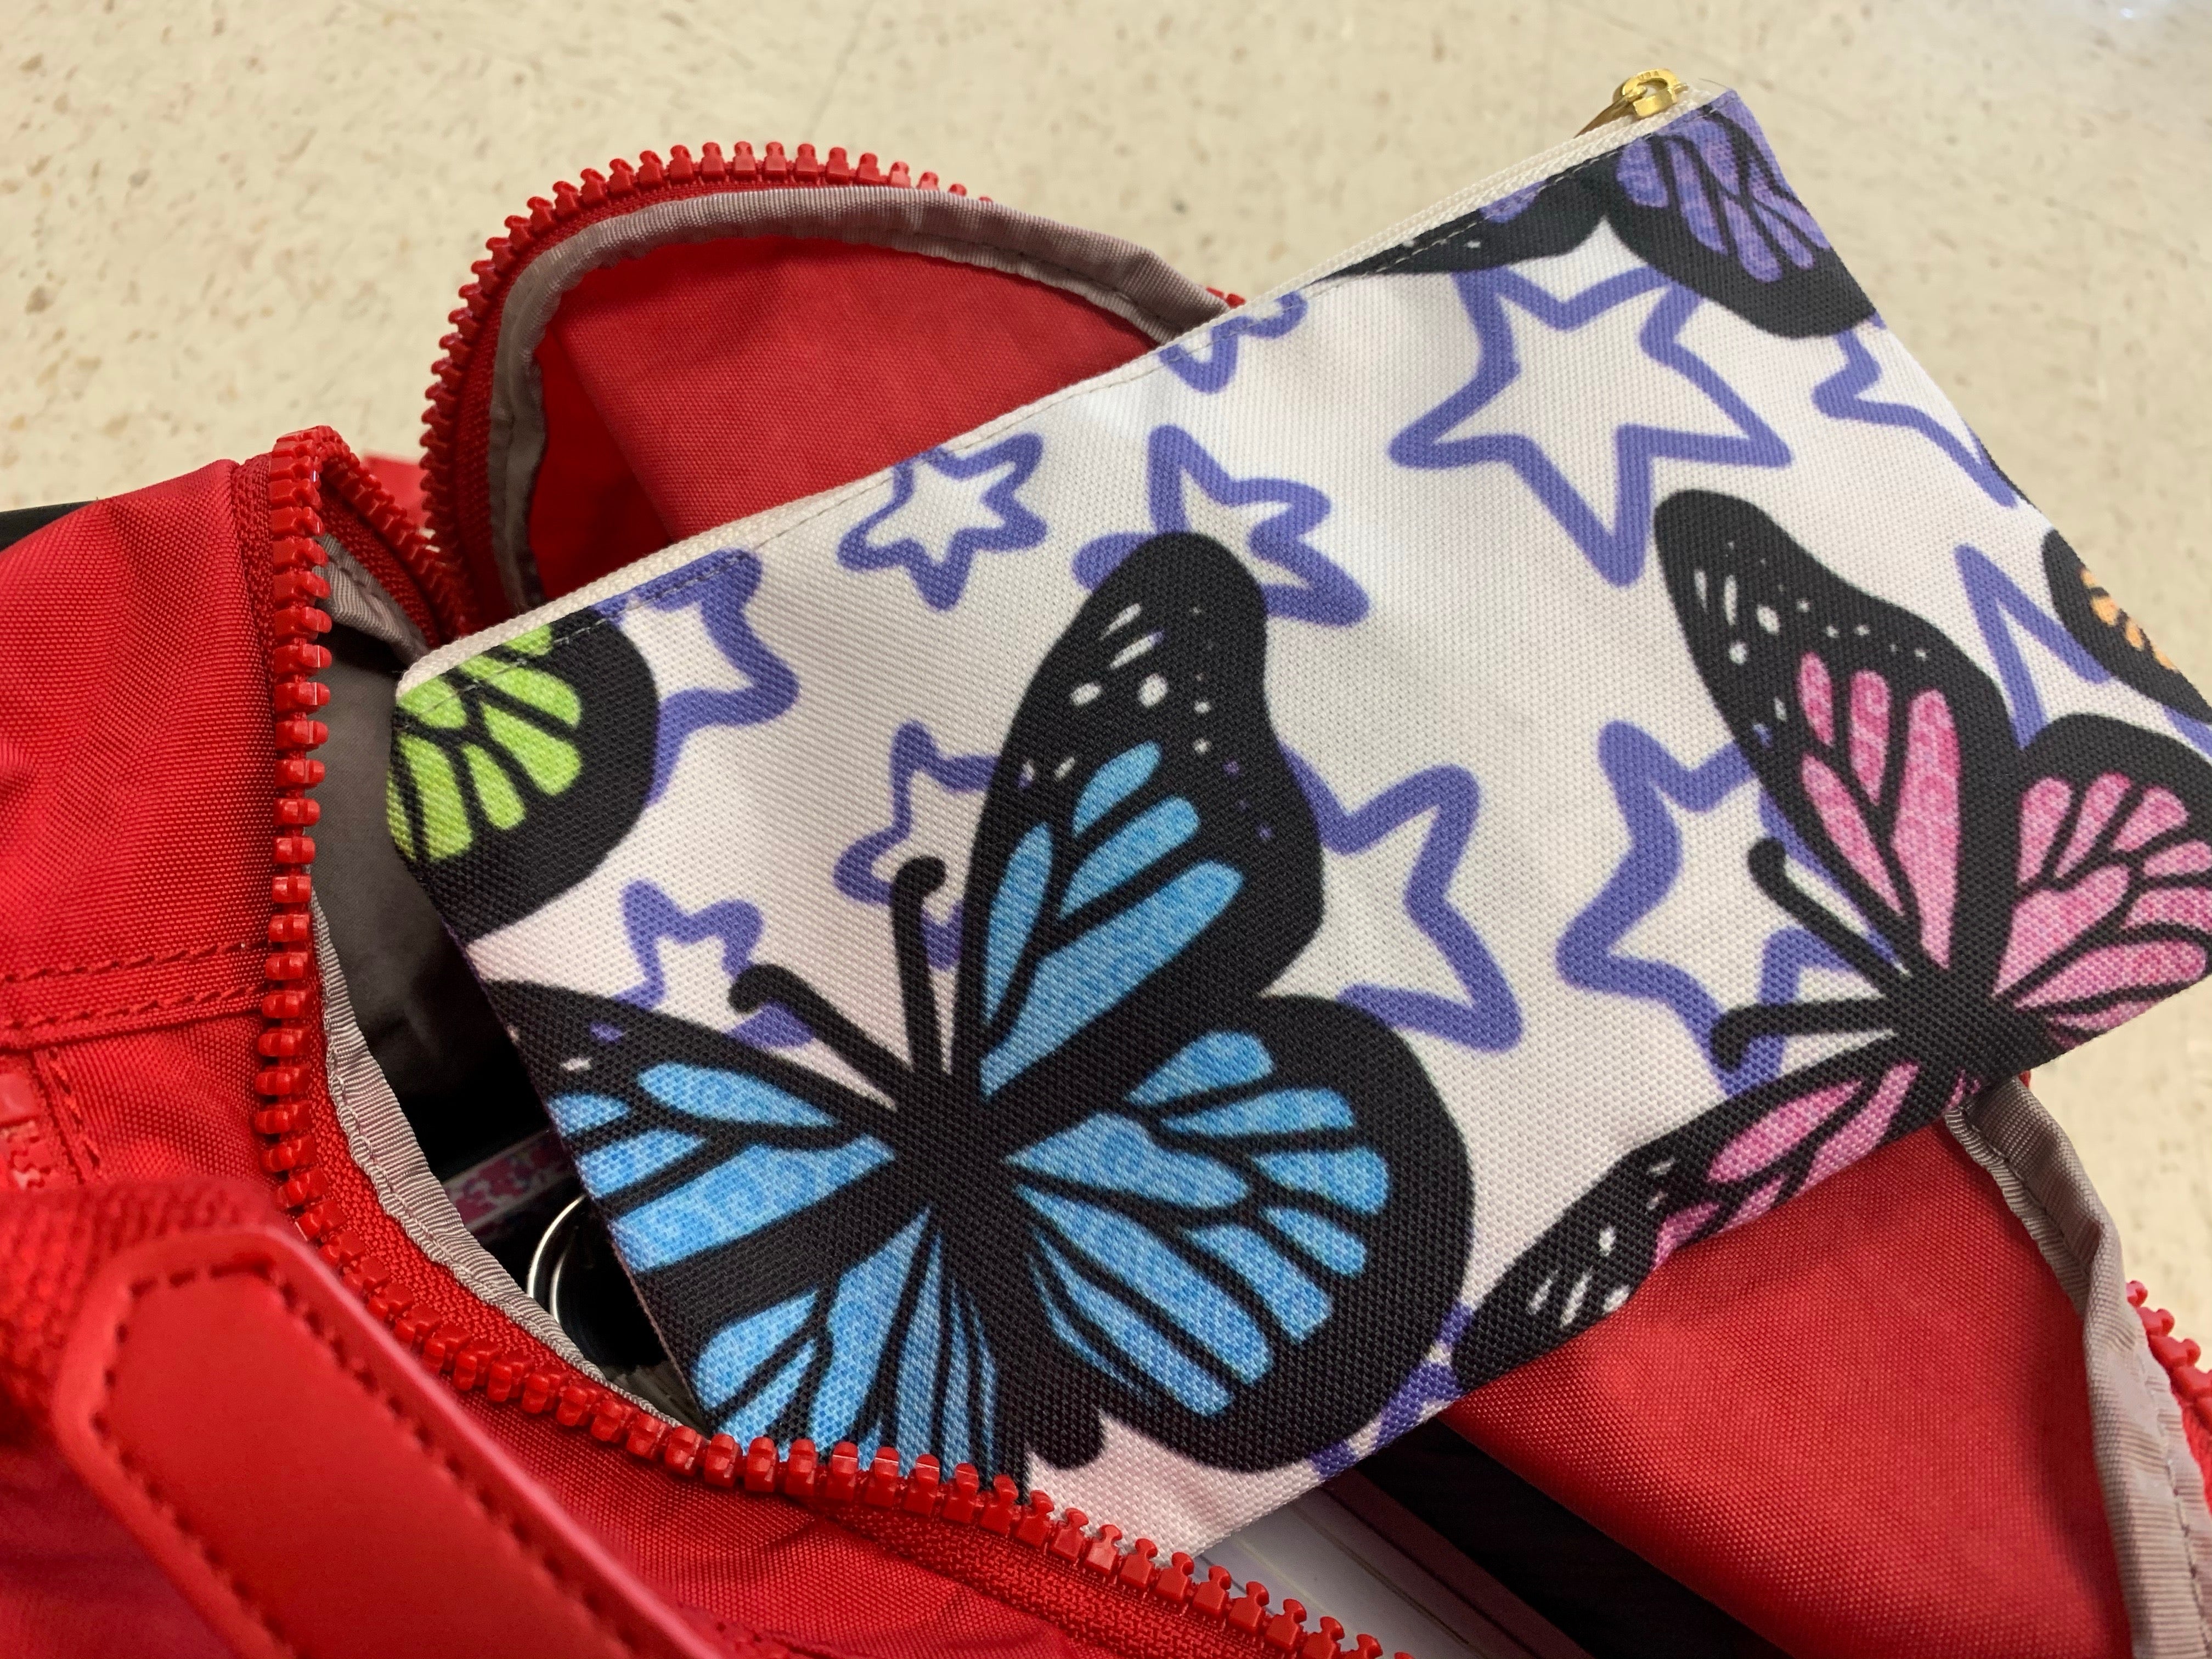 Starry Eyed Butterfly Accessory Pouch